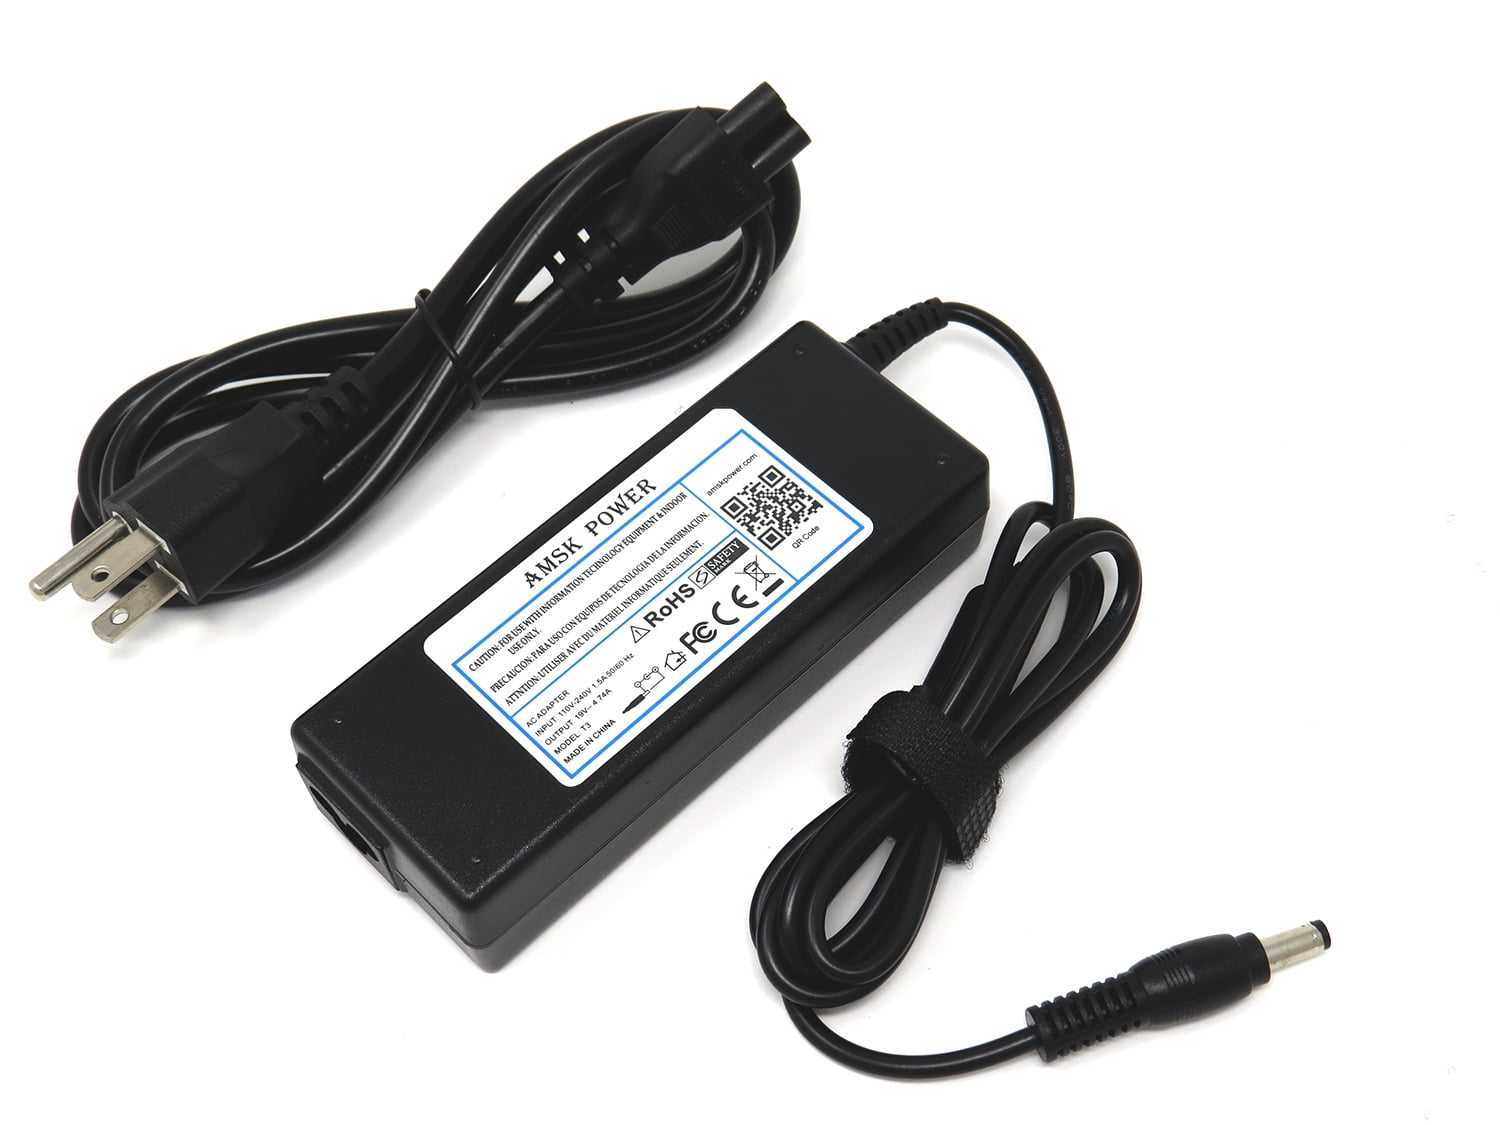 Dell XPS 11 12 13 14 14z 15 15z 17 18 Laptop Notebook Charger Power Adapter Cord 